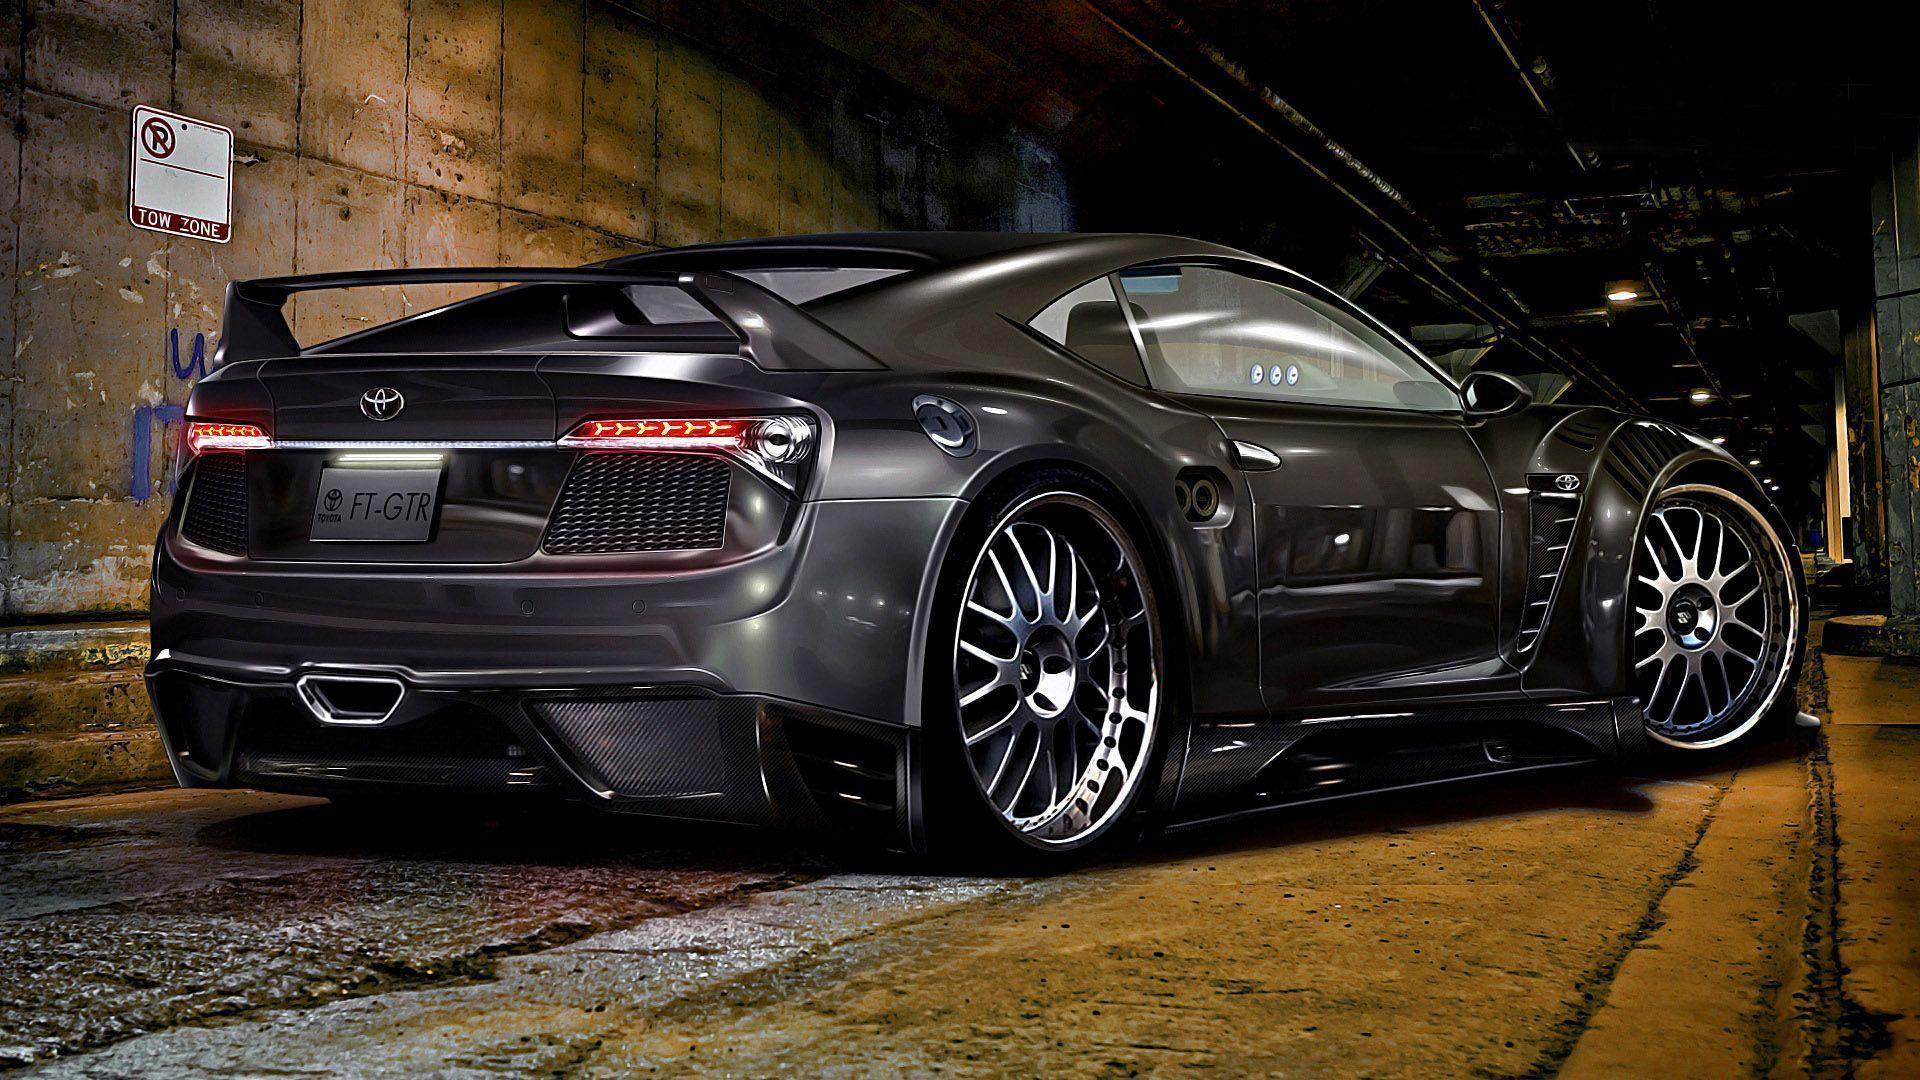 Hot Sport Cars Wallpaper. All About Gallery Car